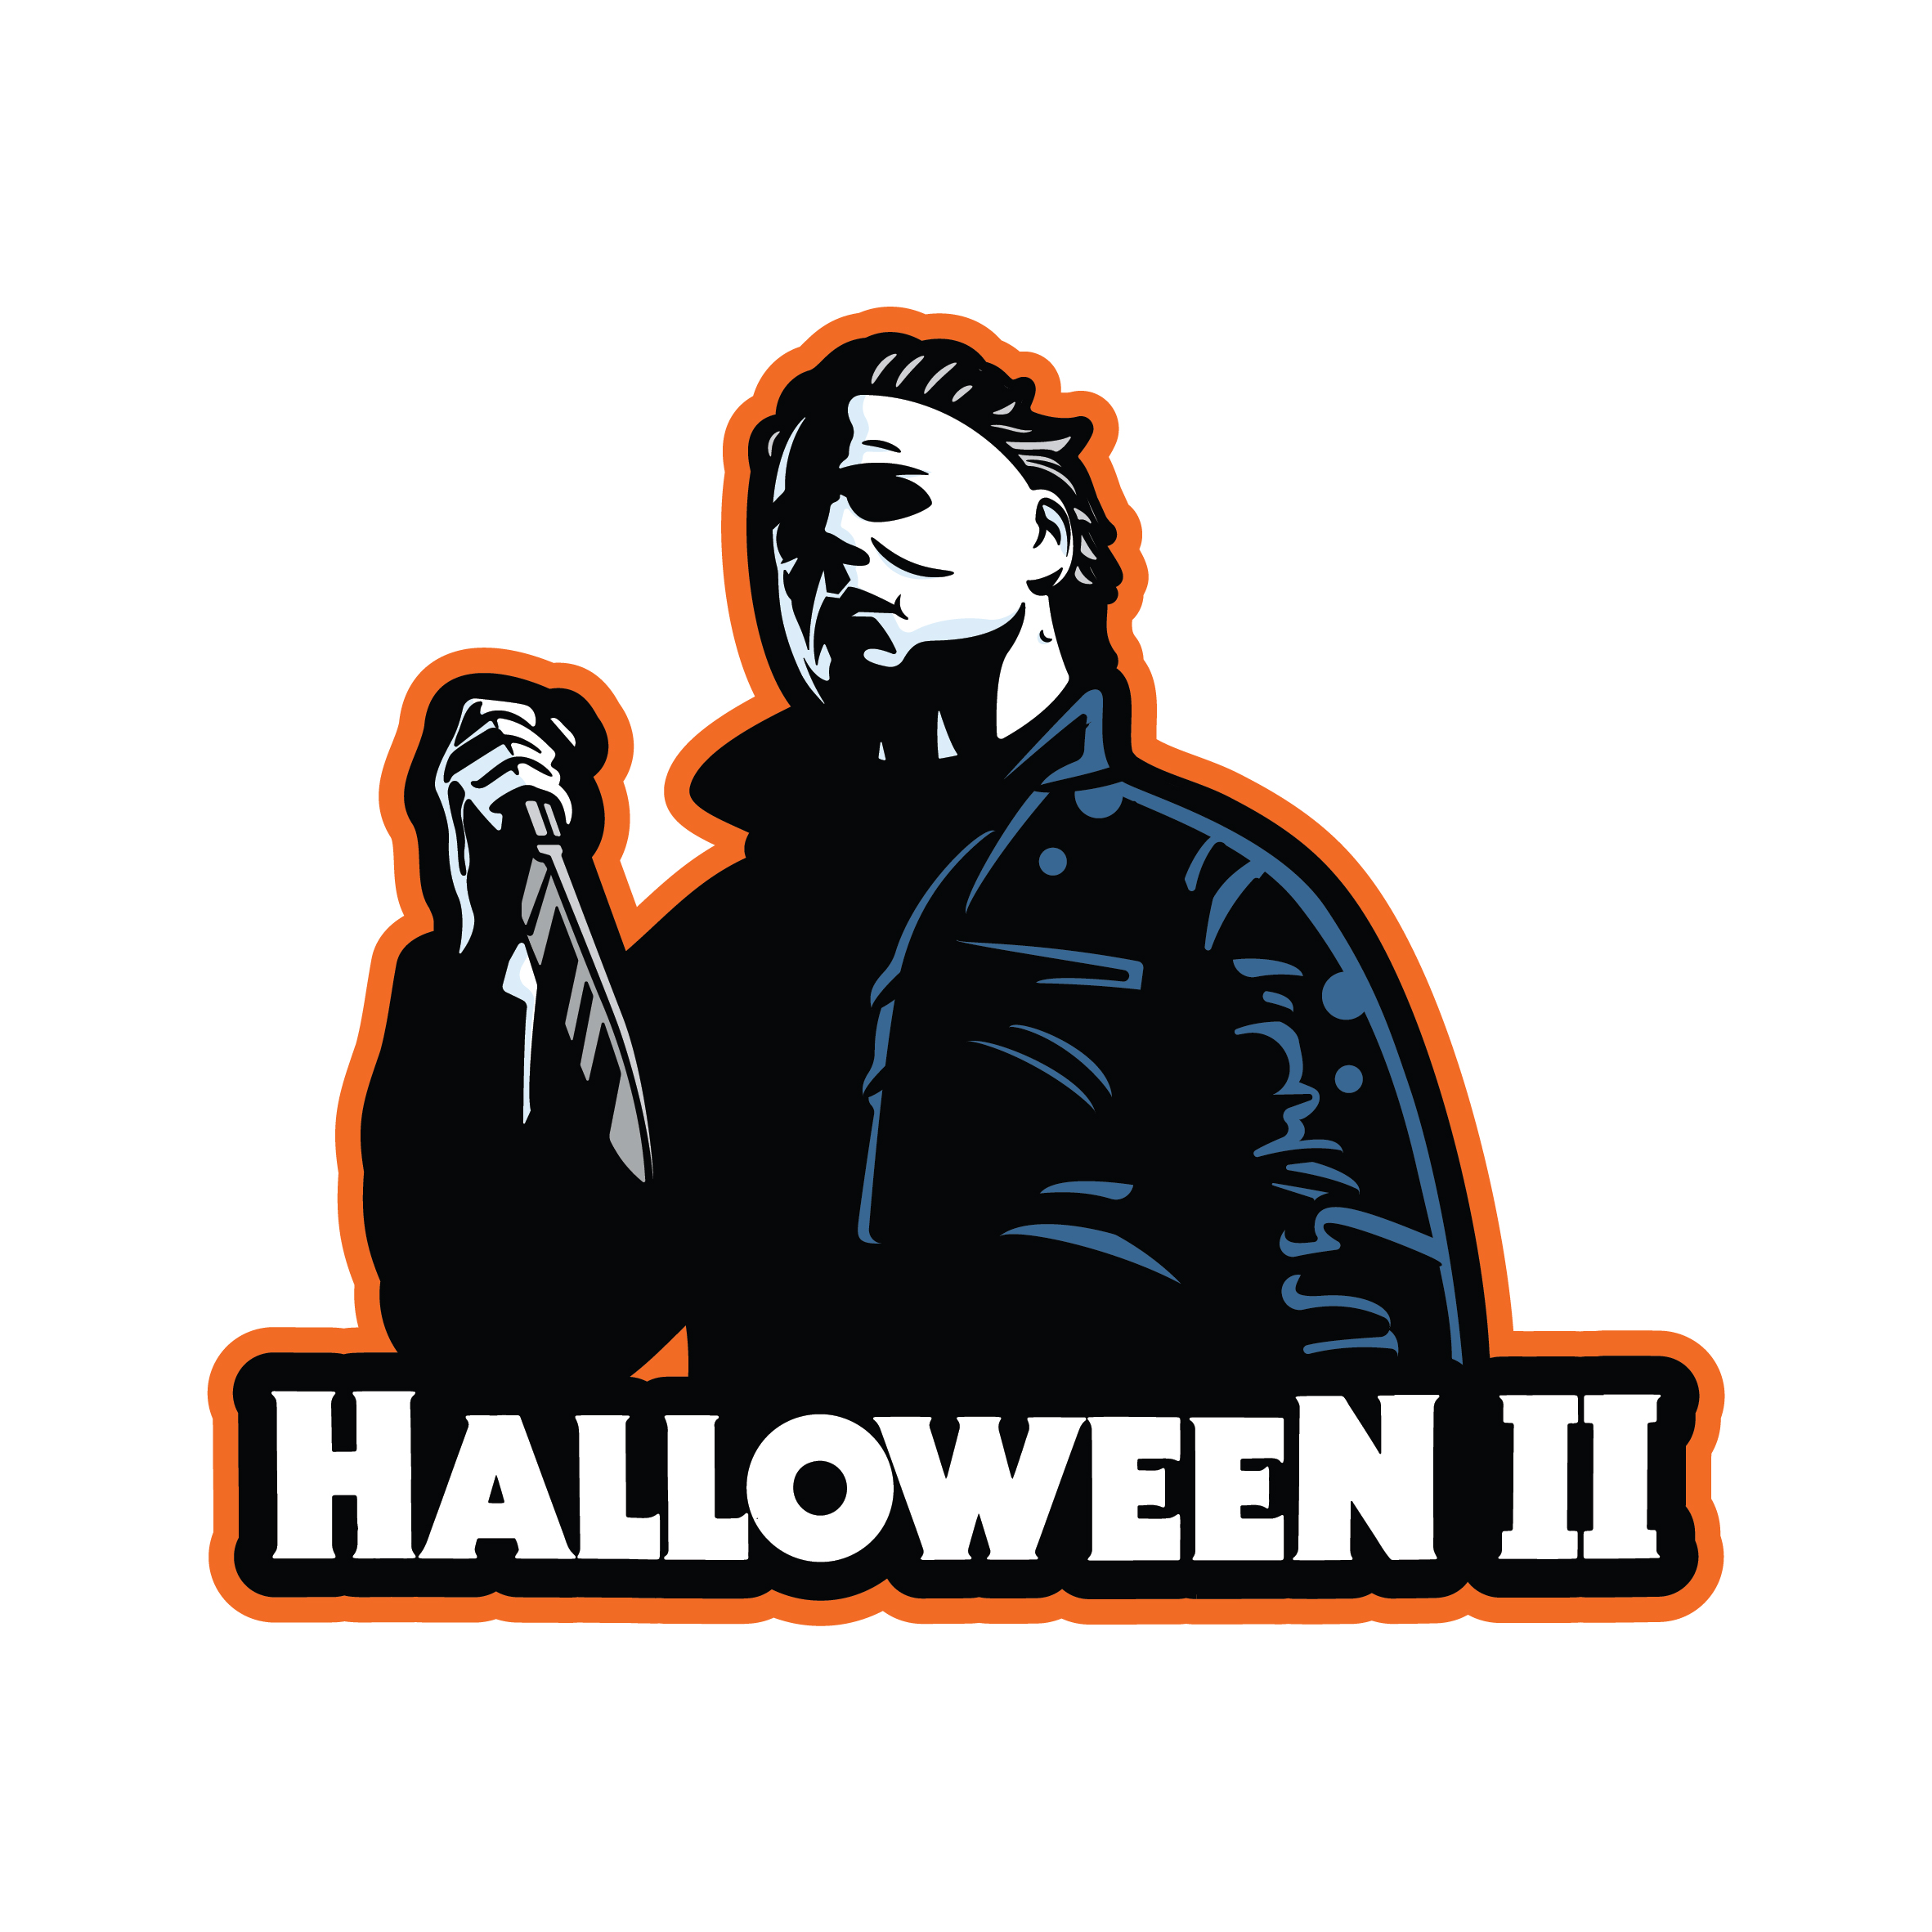 Halloween II logo design by logo designer Tortoiseshell Black for your inspiration and for the worlds largest logo competition